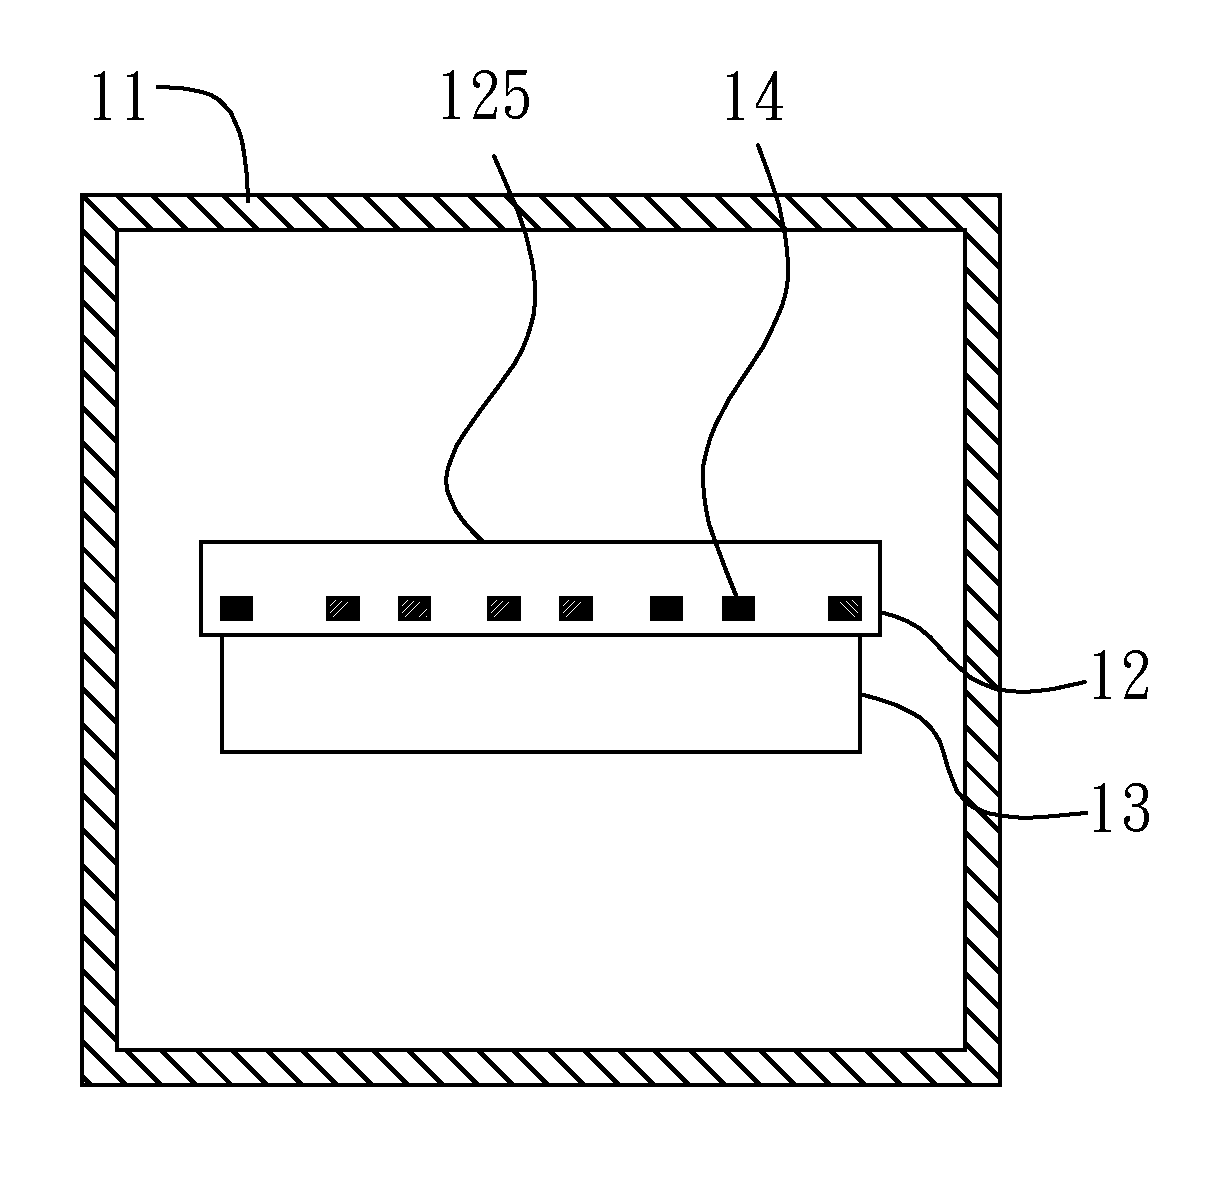 Apparatus and method for controlling workpiece temperature